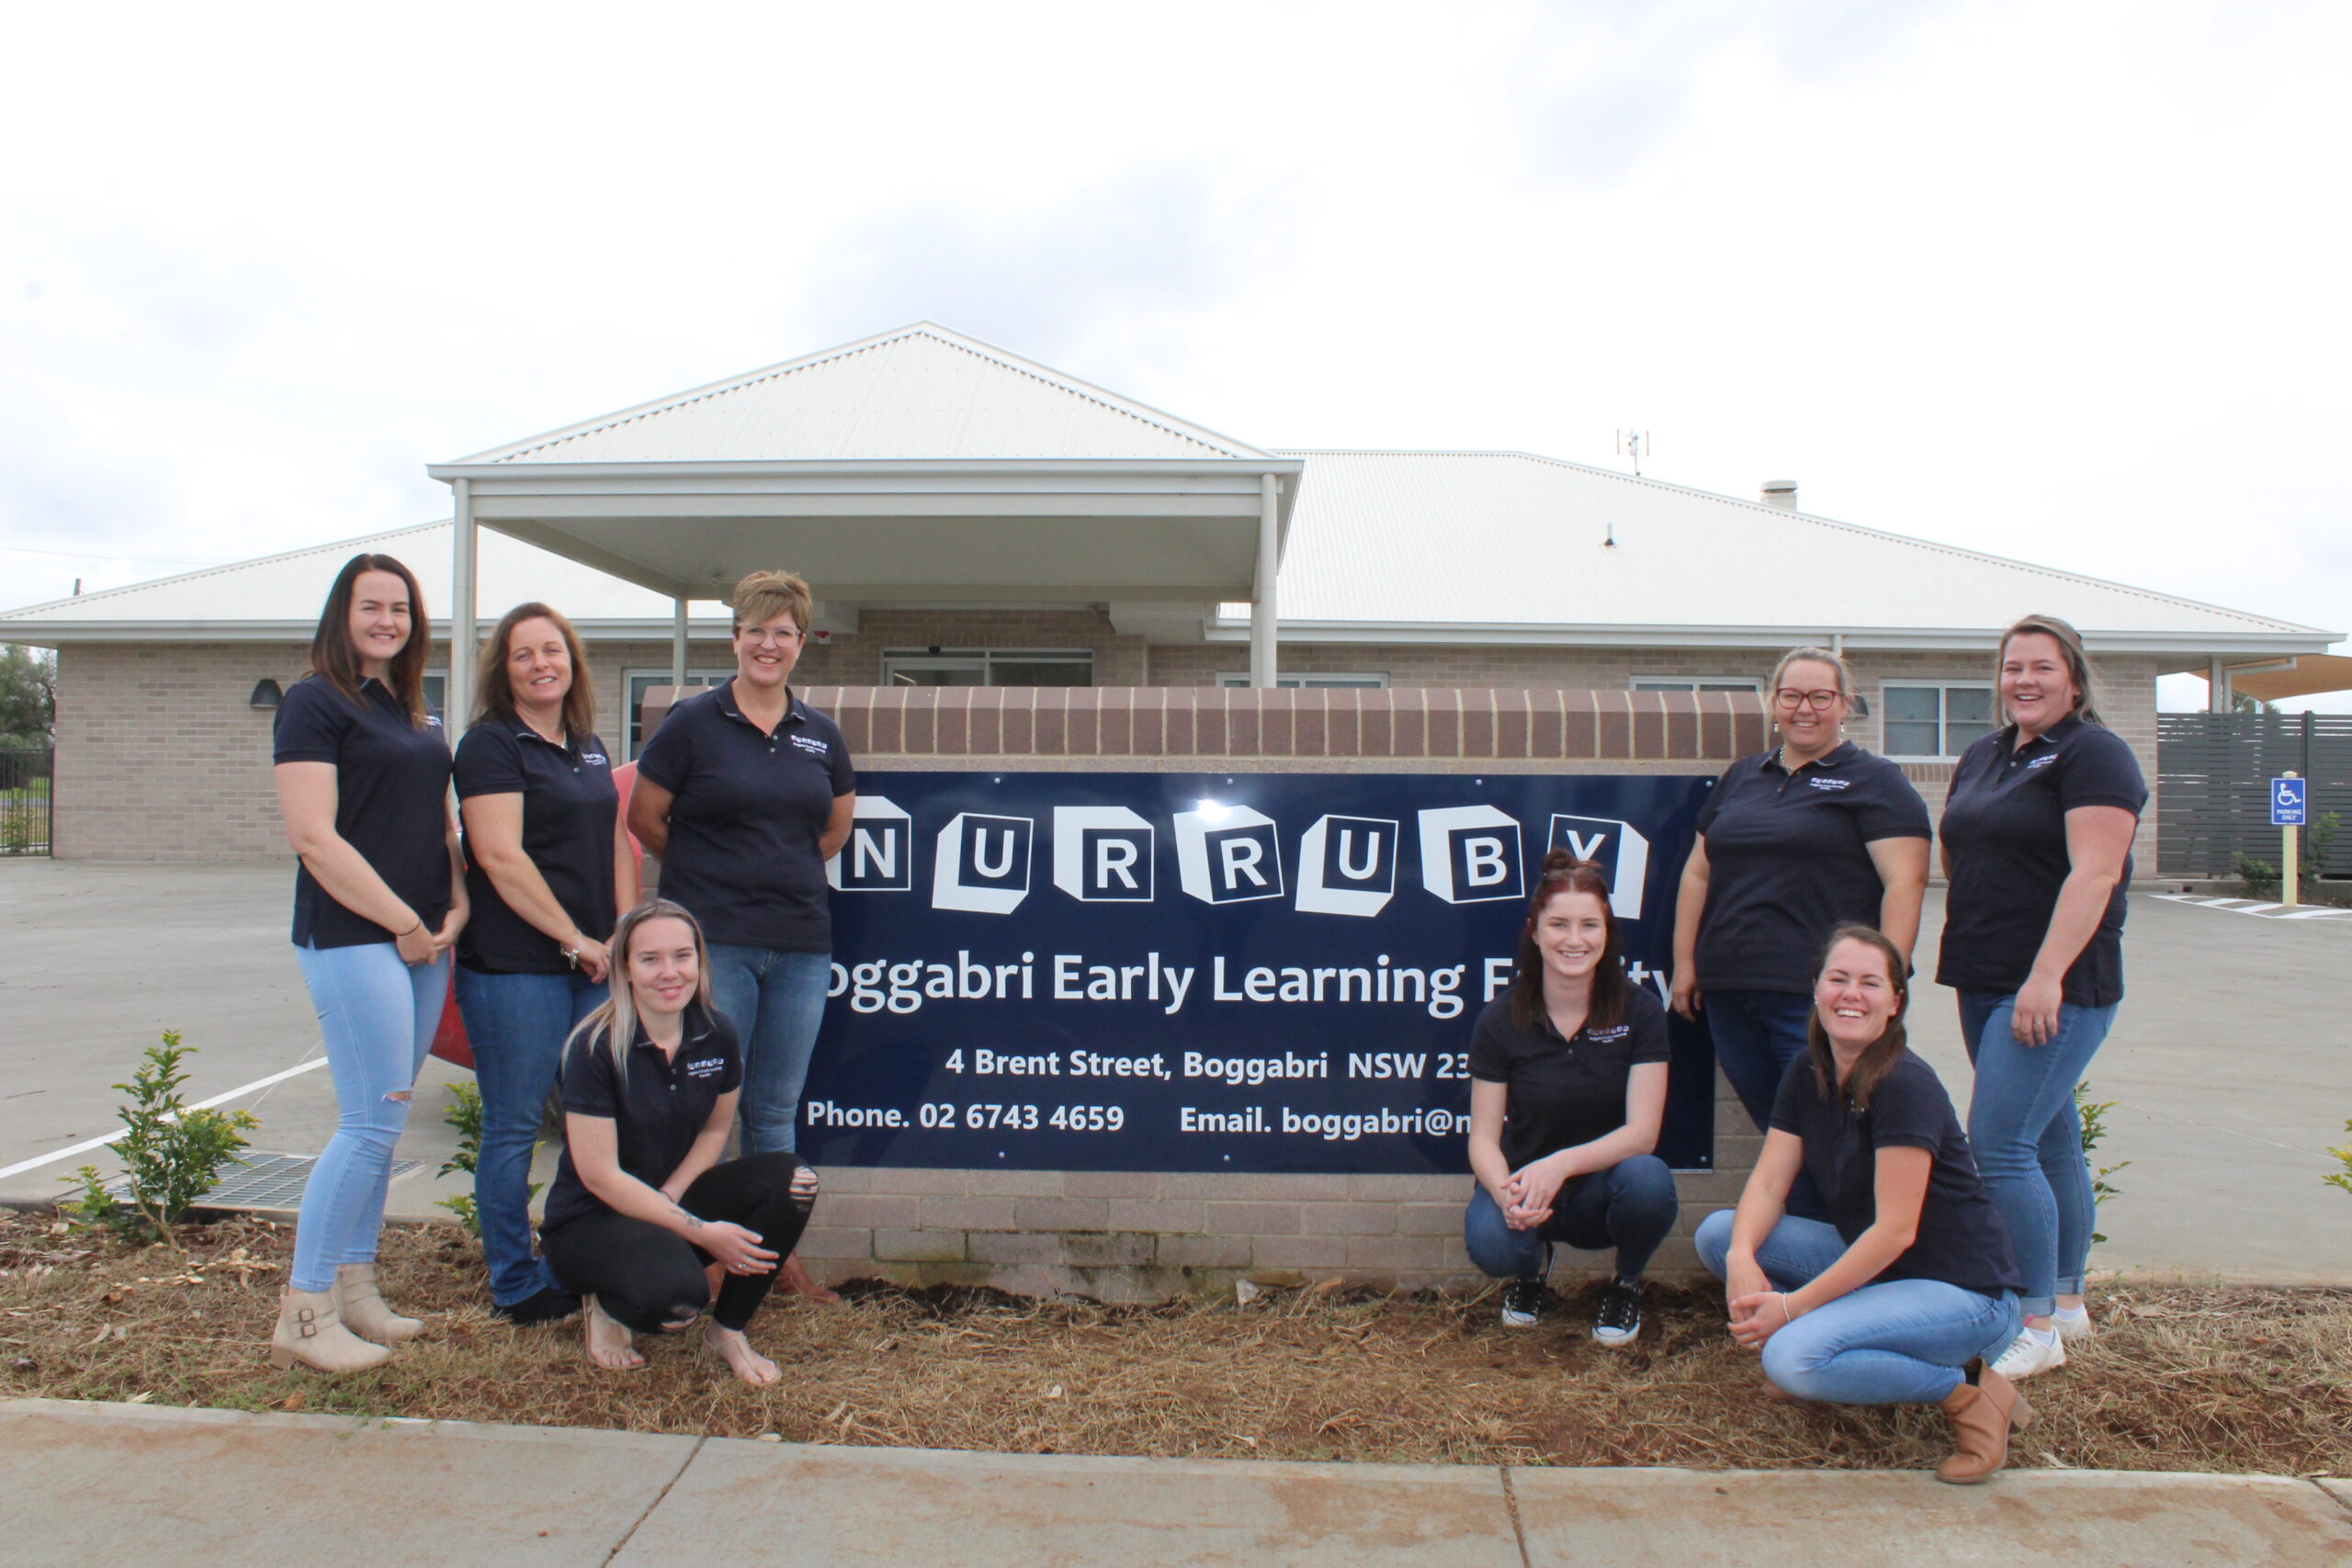 Nurruby Boggabri Early Learning facility opens | PHOTOS